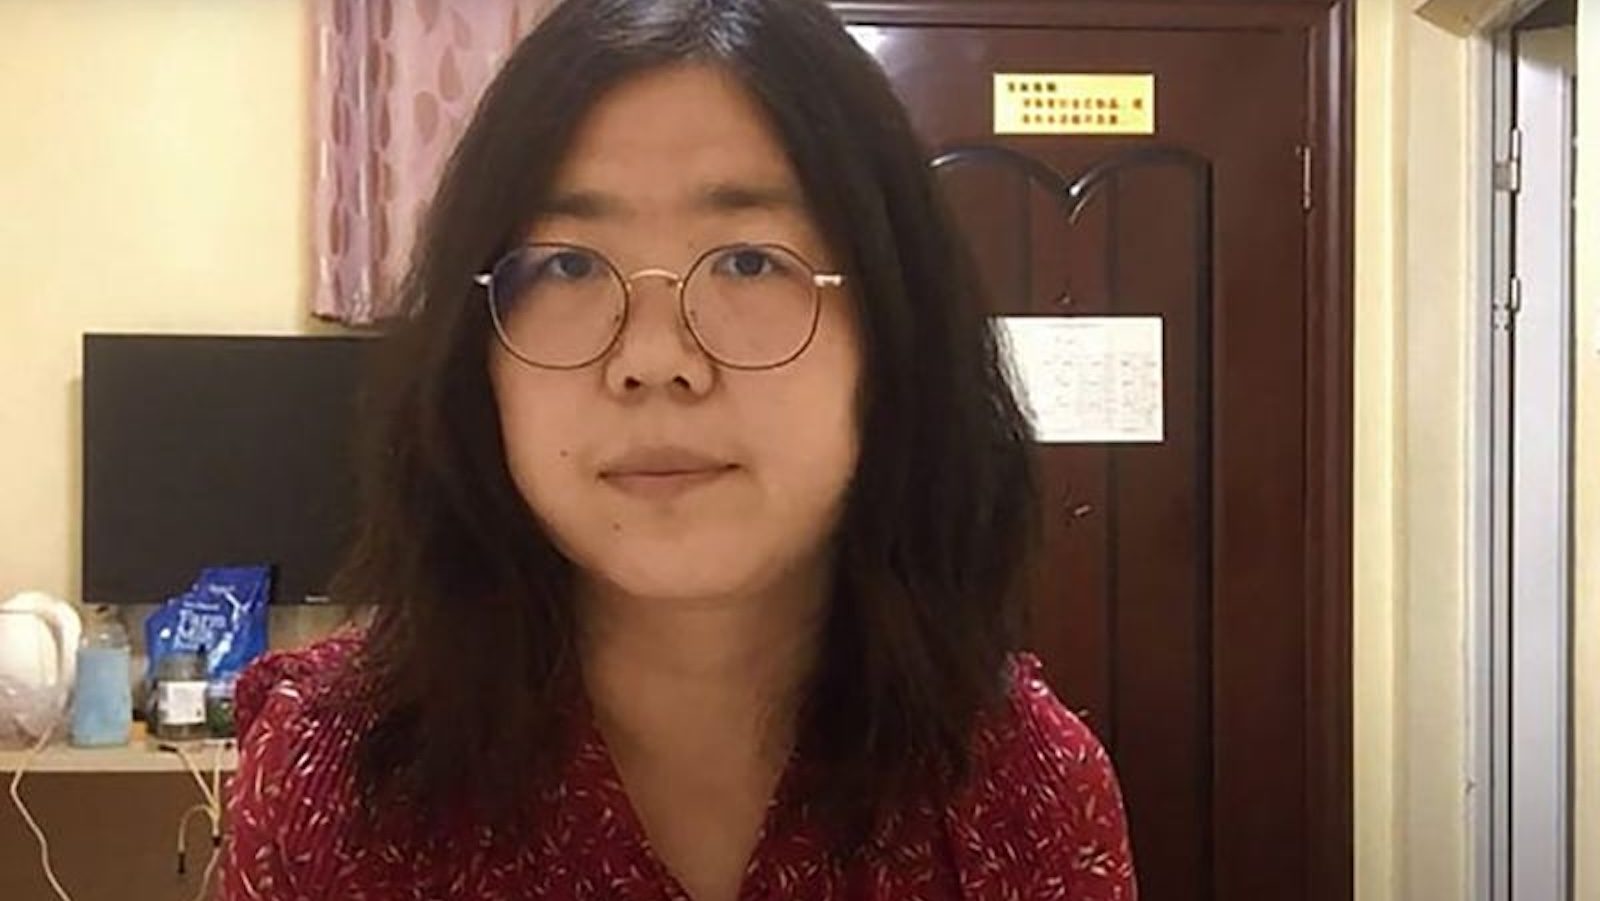 Chinese journalist Zhang Zhan, jailed for reporting on Covid-19, will be released after four years in prison